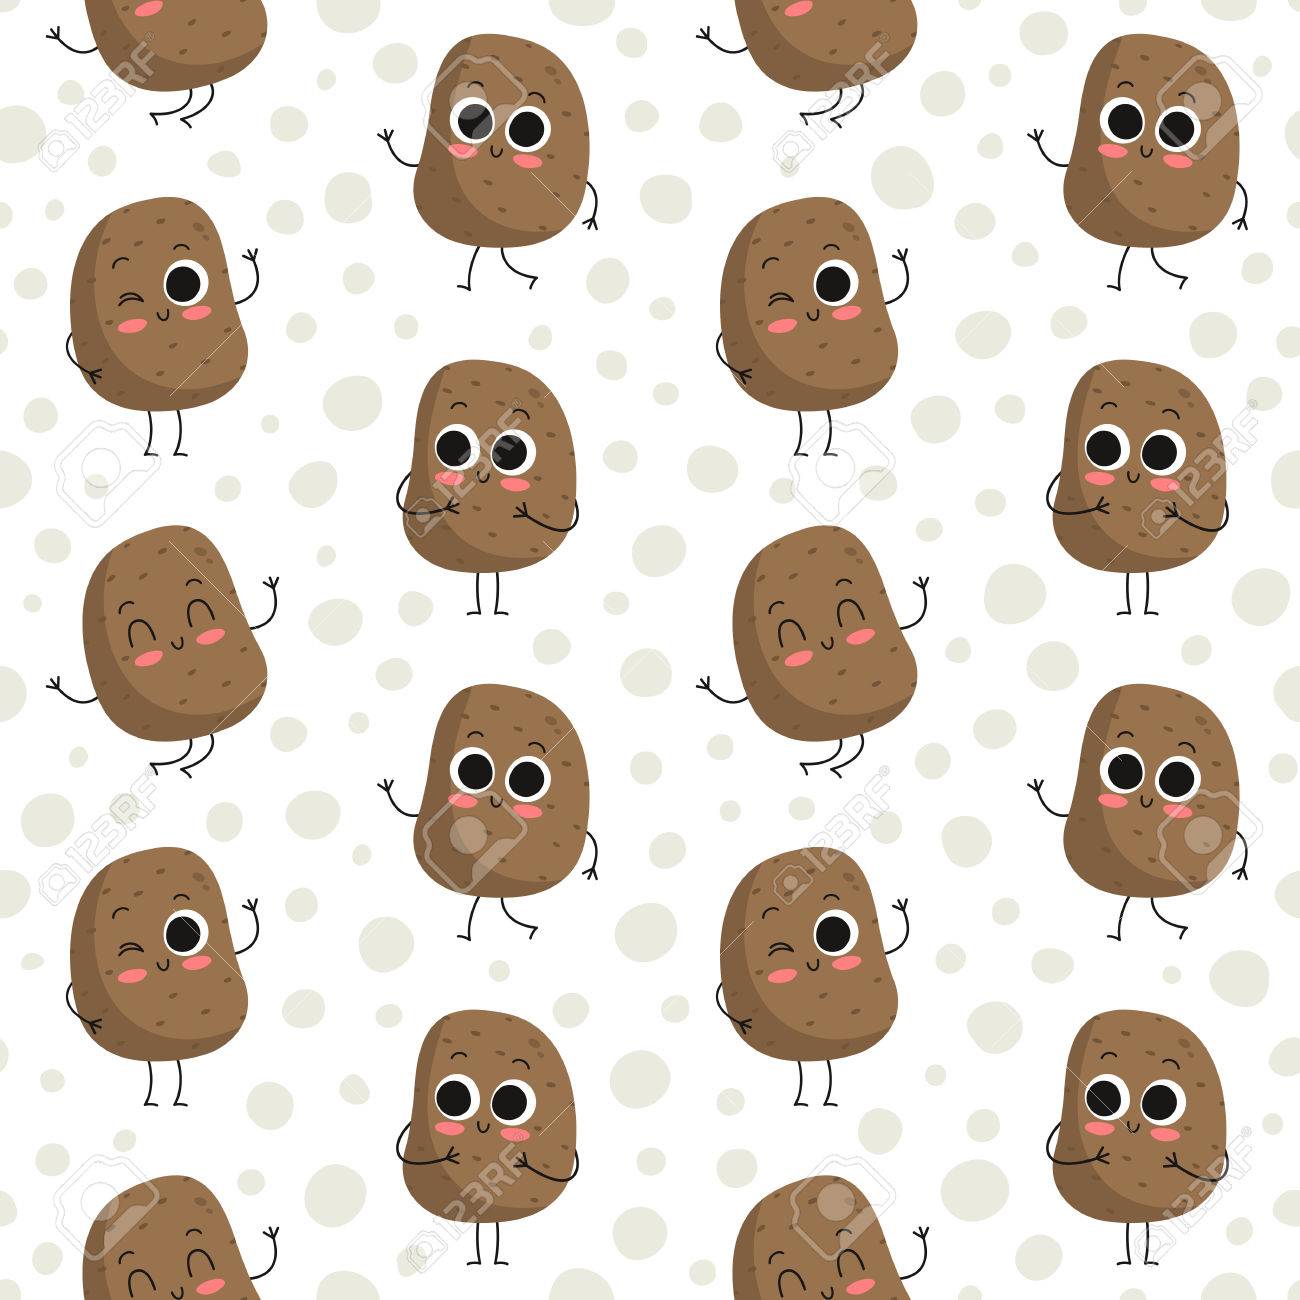 Potatoes Vector Seamless Pattern With Cute Fruit Characters On